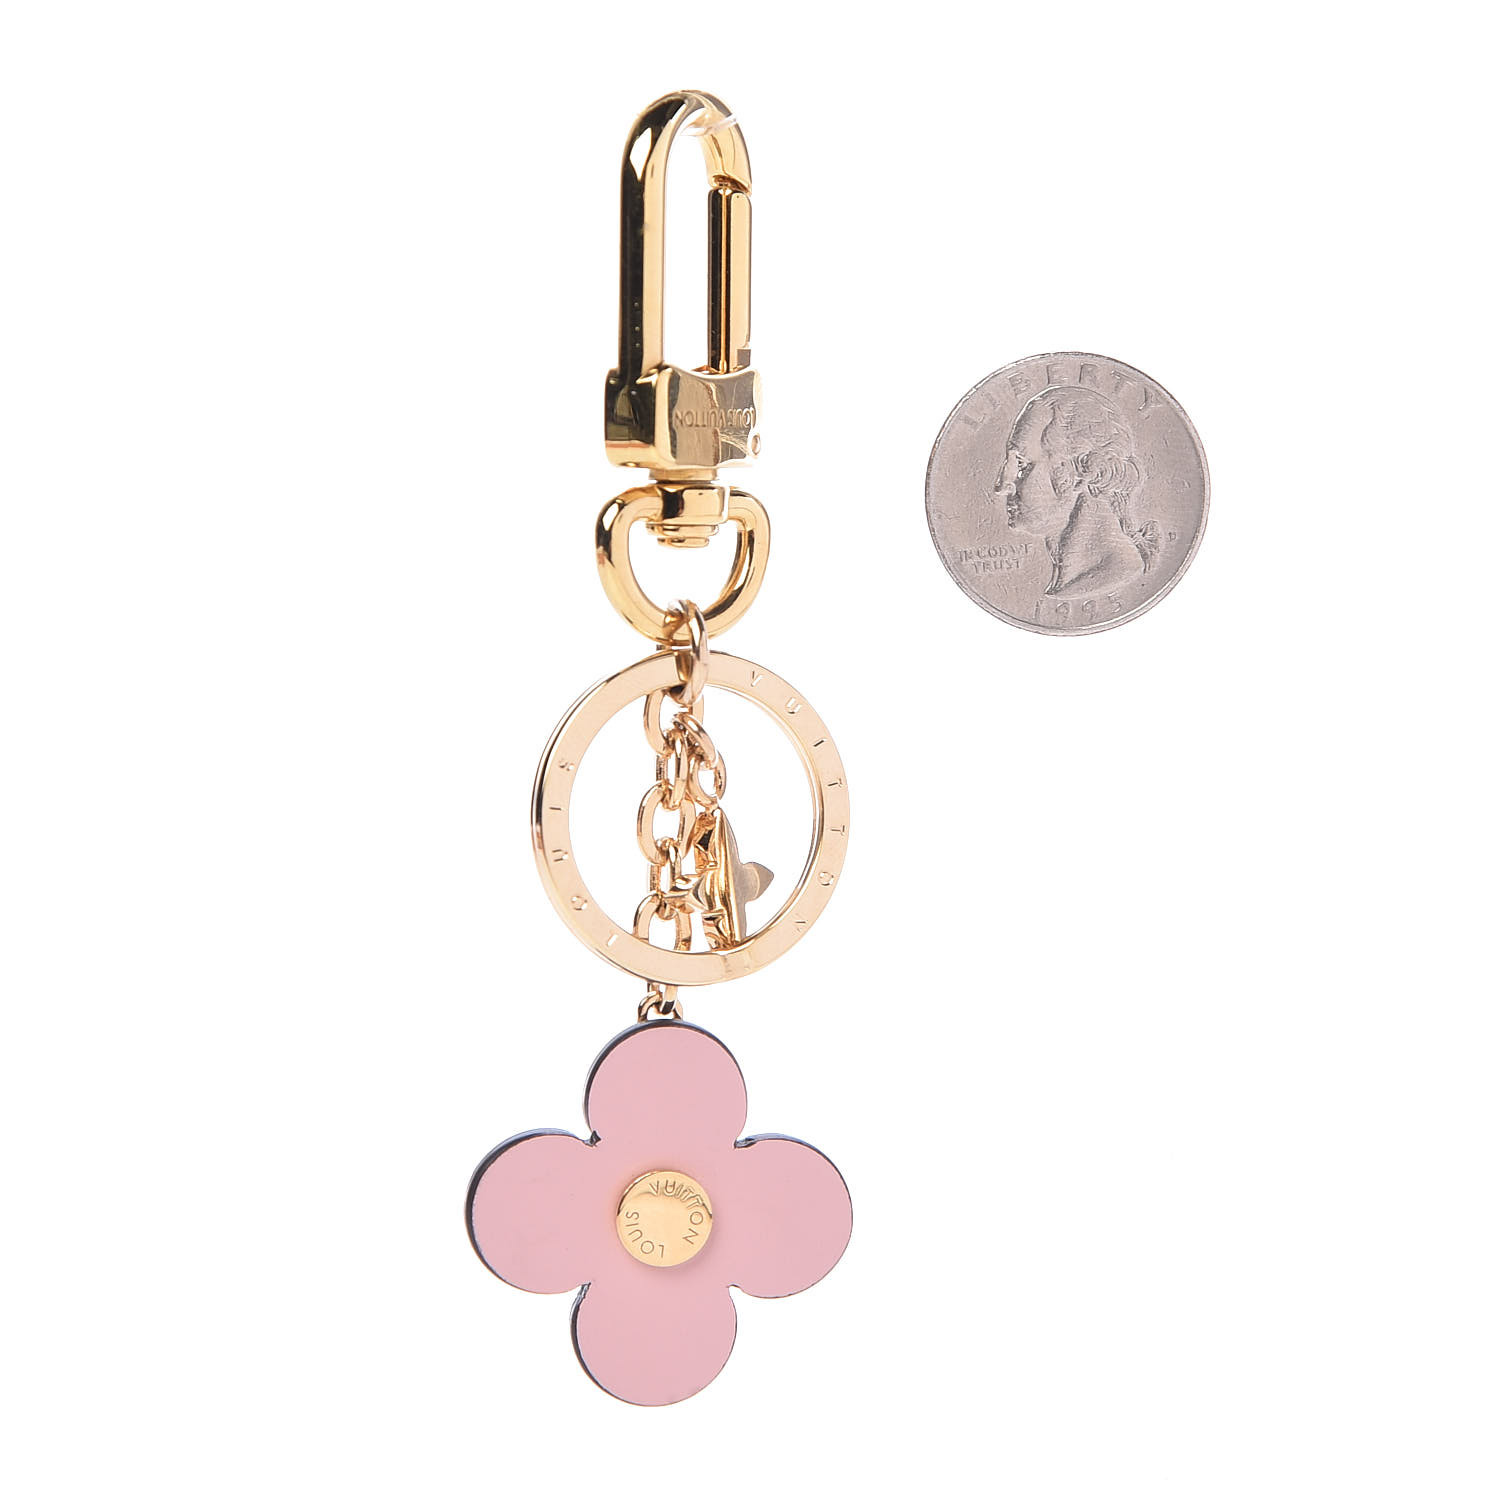 Louis Vuitton Blooming Flowers Chain Bag Charm And Key Holder